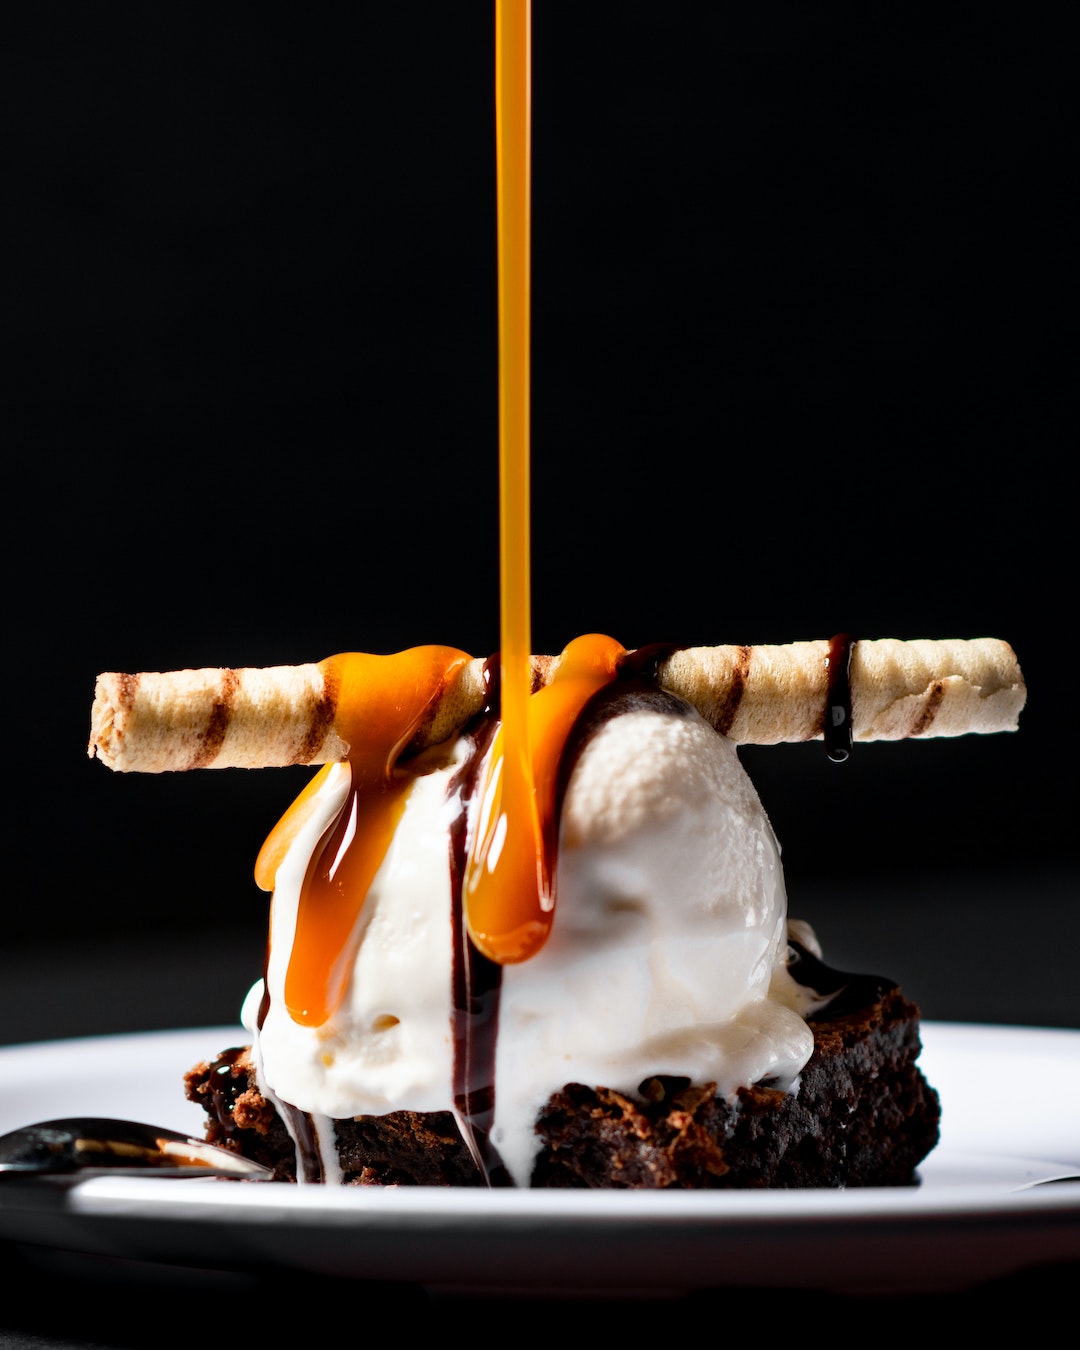 Image of one father's day desserts option: homemade caramel recipe.